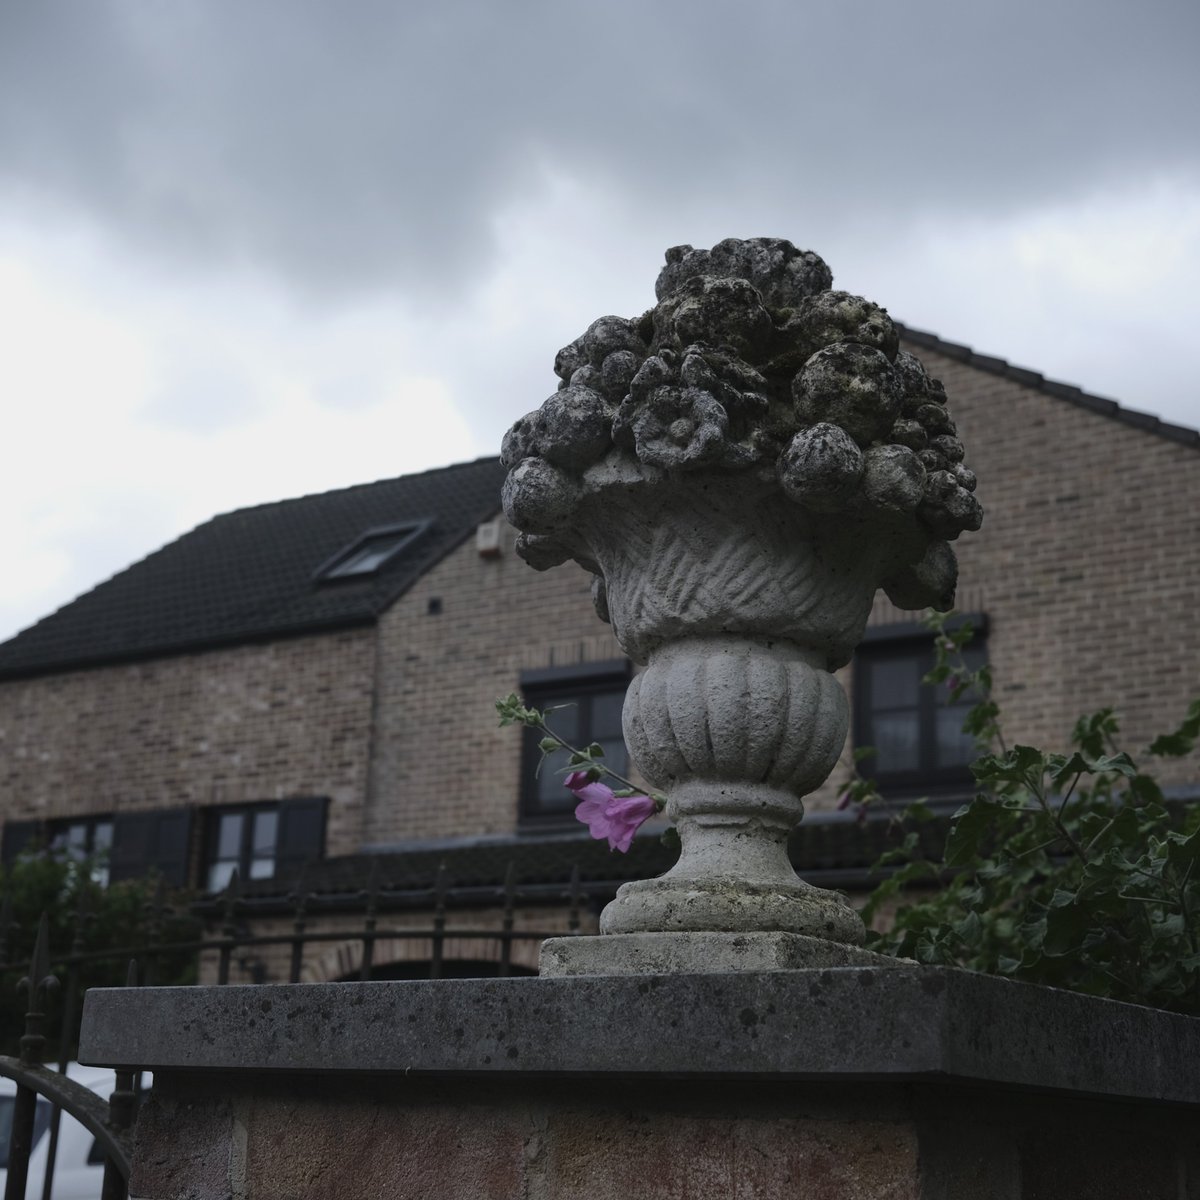 #flowerbasket around #walhain
#uglybelgianstatues by (ig and fb) charles.lemaire.photographe and uglybelgianstatues
Not all of them are really ugly... but !